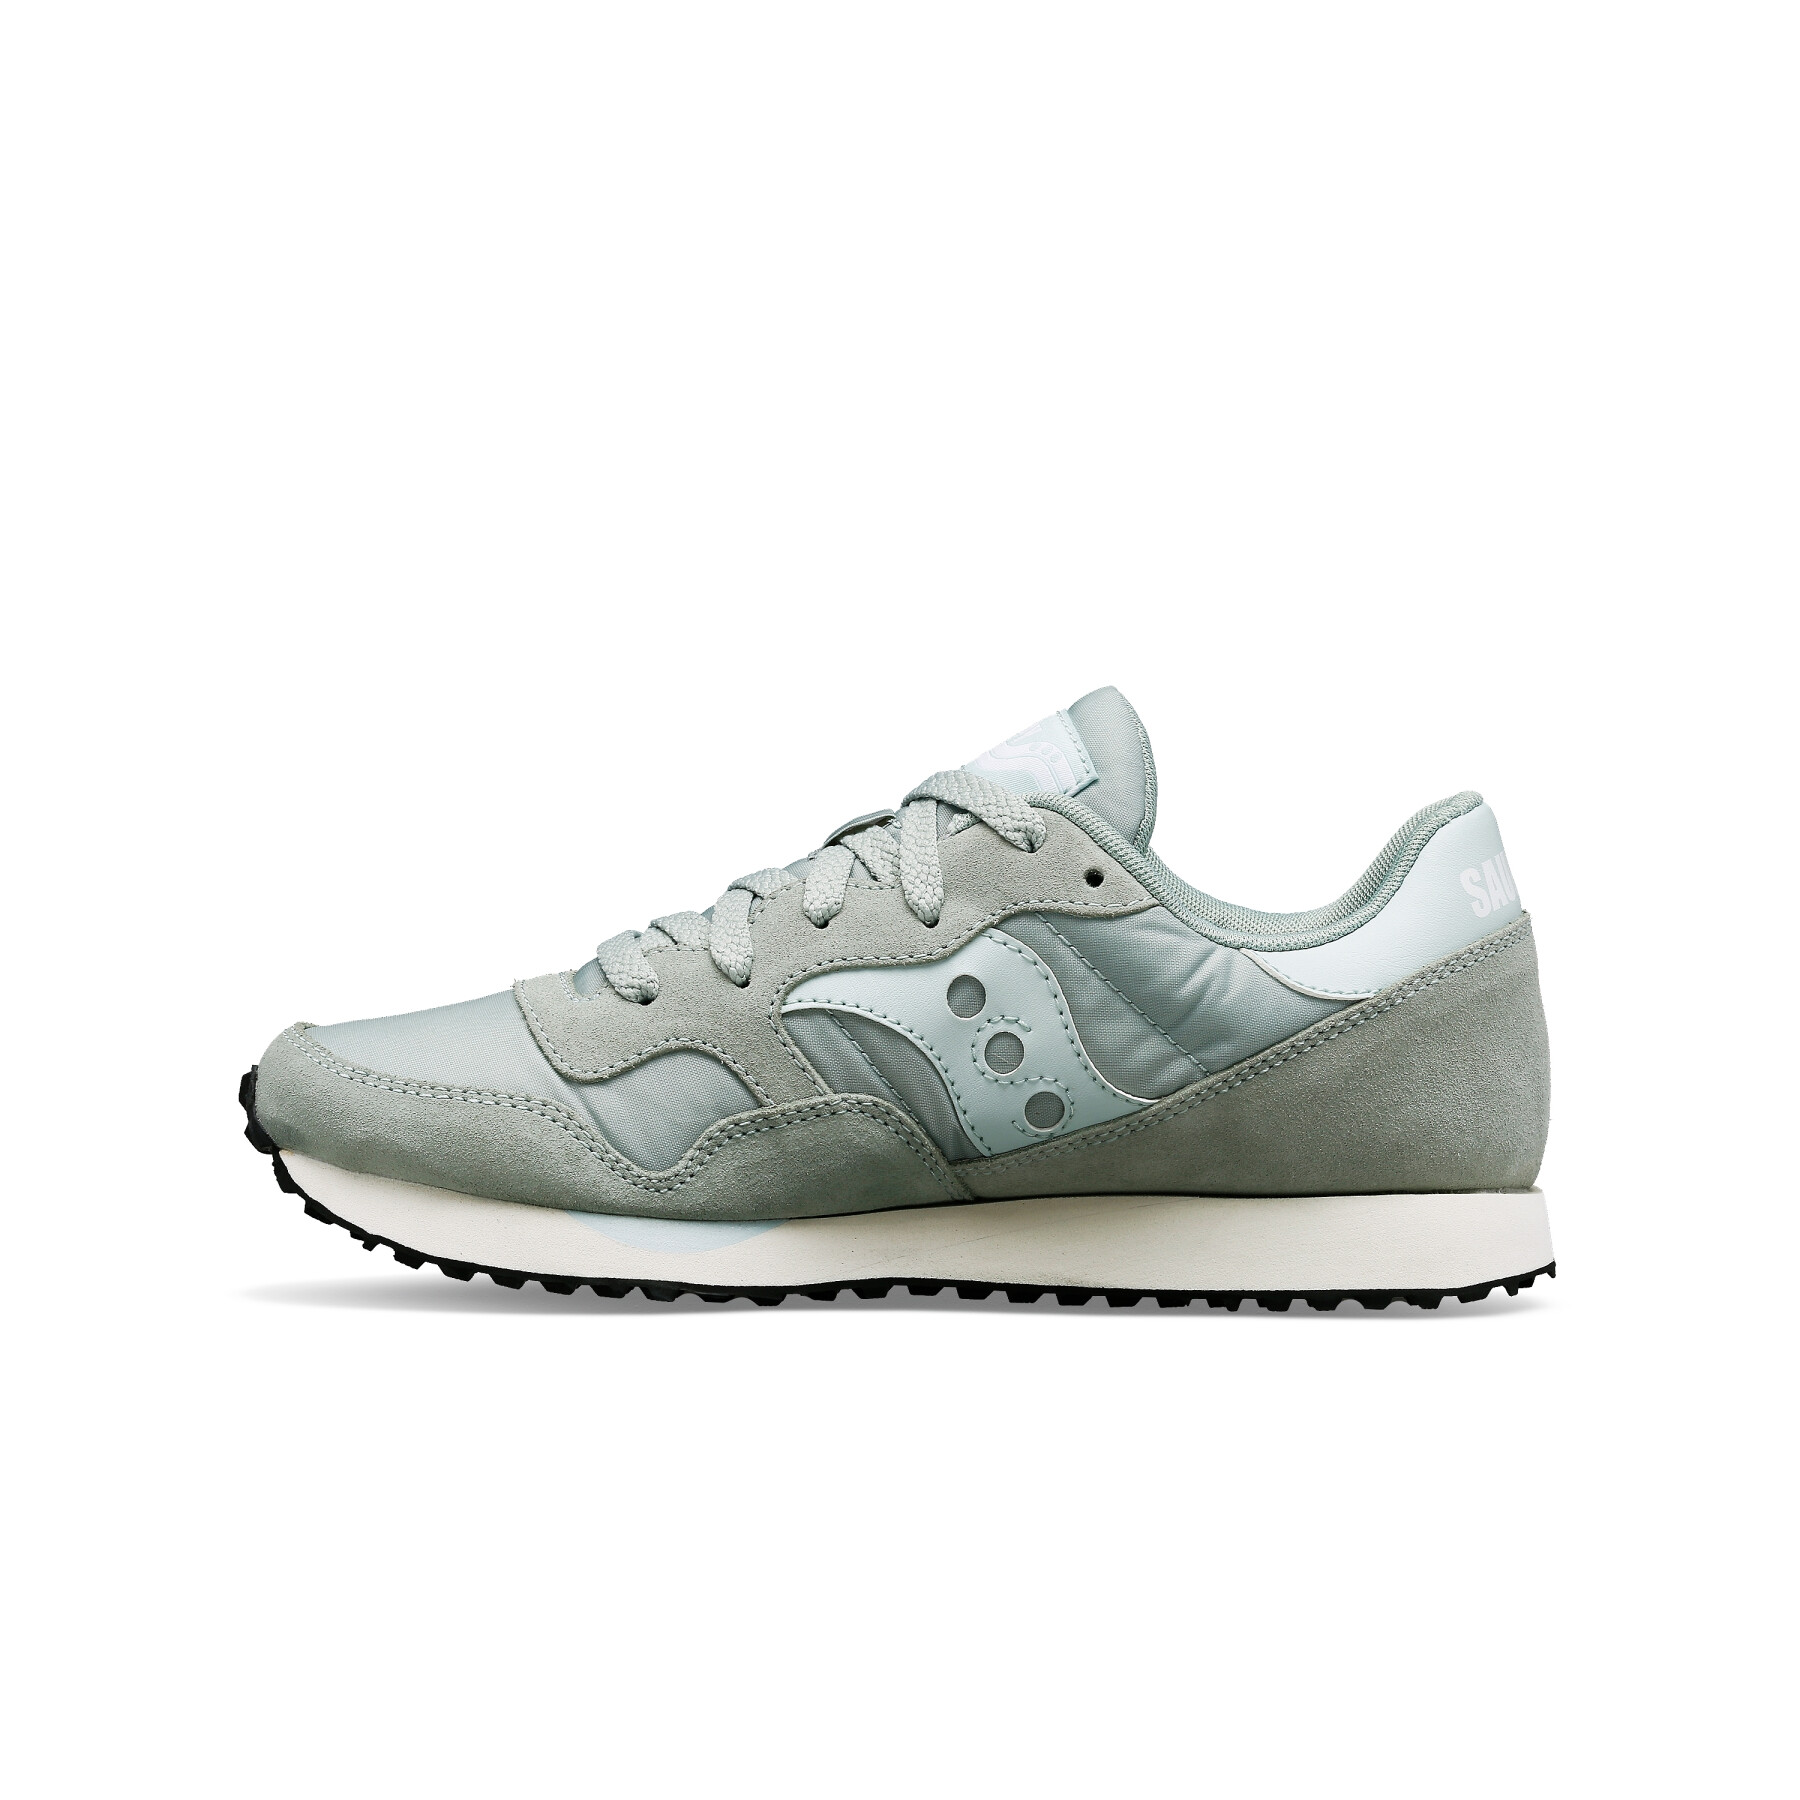 Zapatillas mujer Saucony DXN Trainer